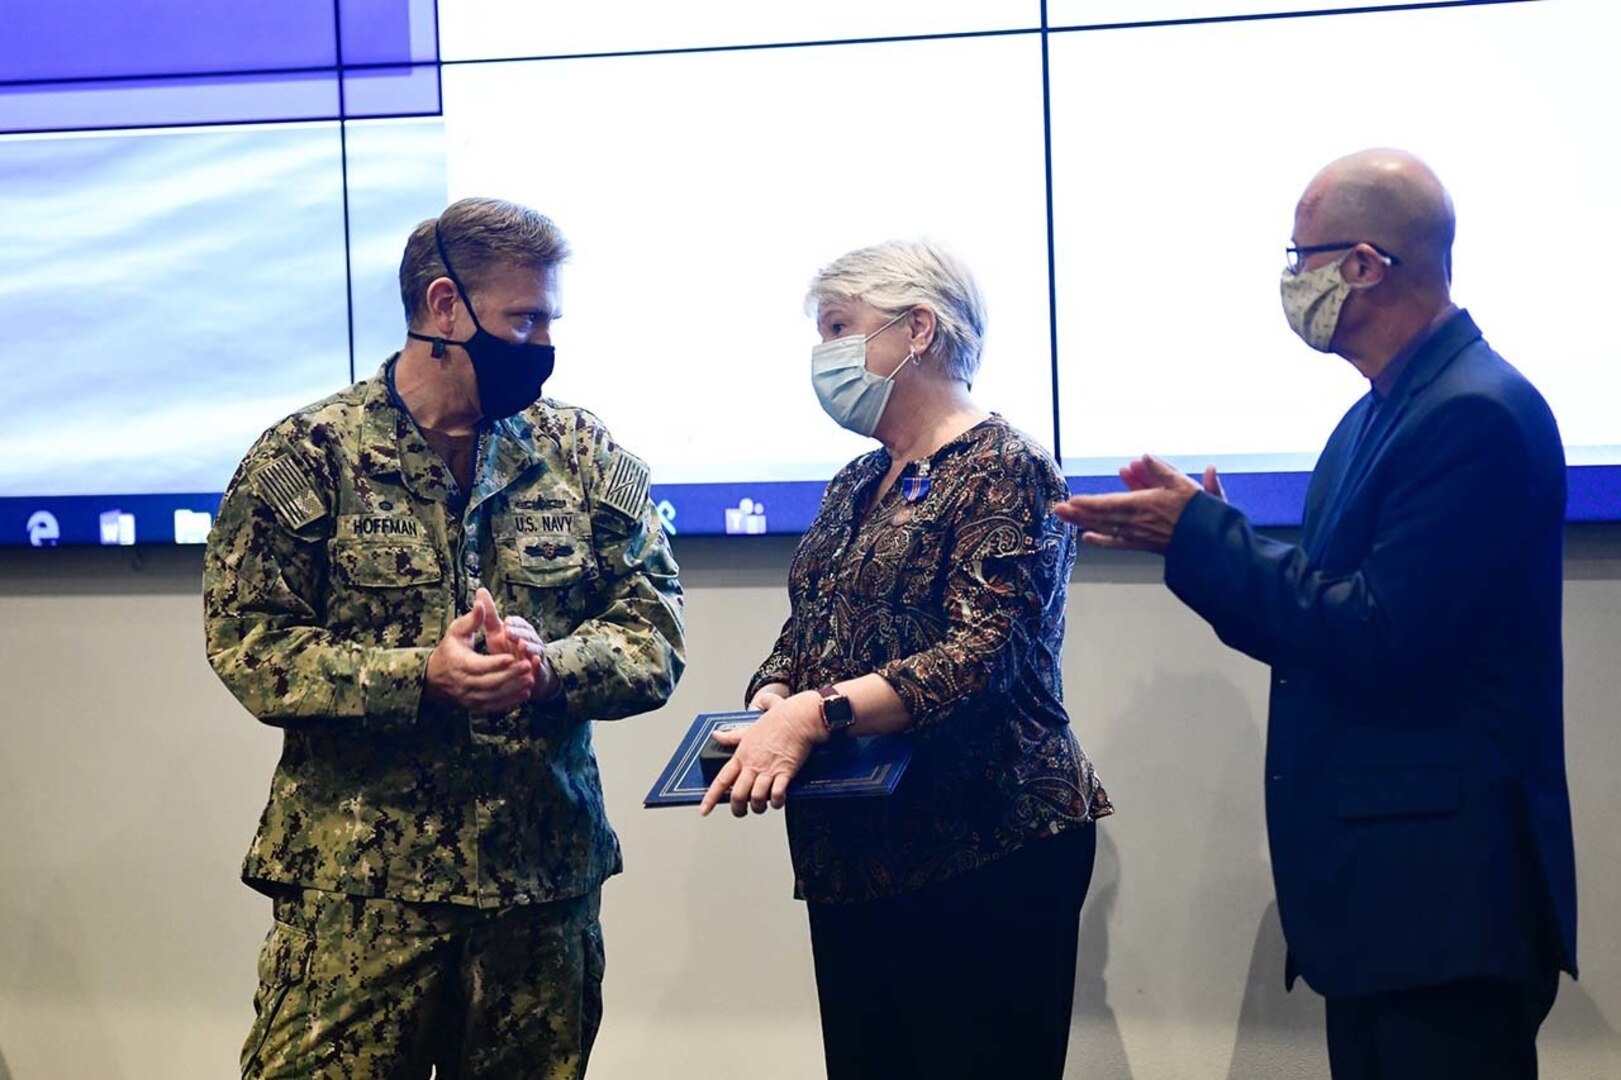 NSWC PHD Commanding Officer Capt. Andrew Hoffman (left) and Technical Director Paul Mann (right) congratulate Air Dominance Department Supportability Manager Janet Mounce on receiving the U.S. Navy Meritorious Civilian Service Award during the command's All Hands event, July 28.